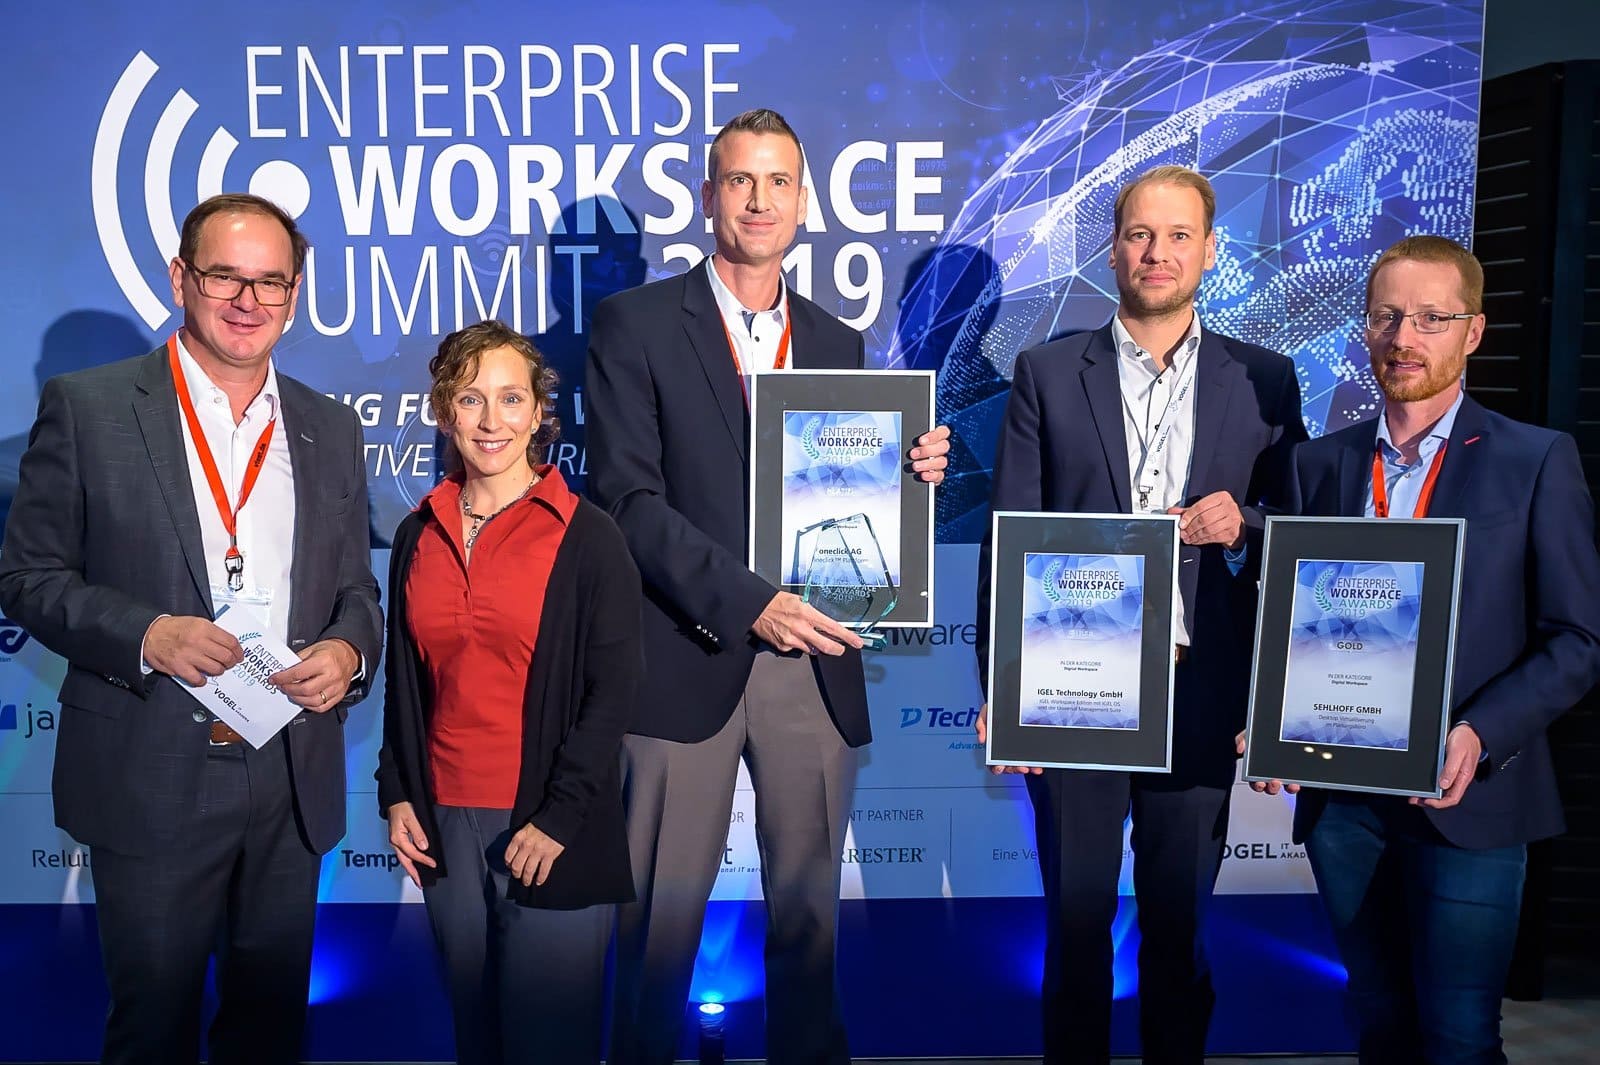 The winners of the Enterprise Workspace Award 2019